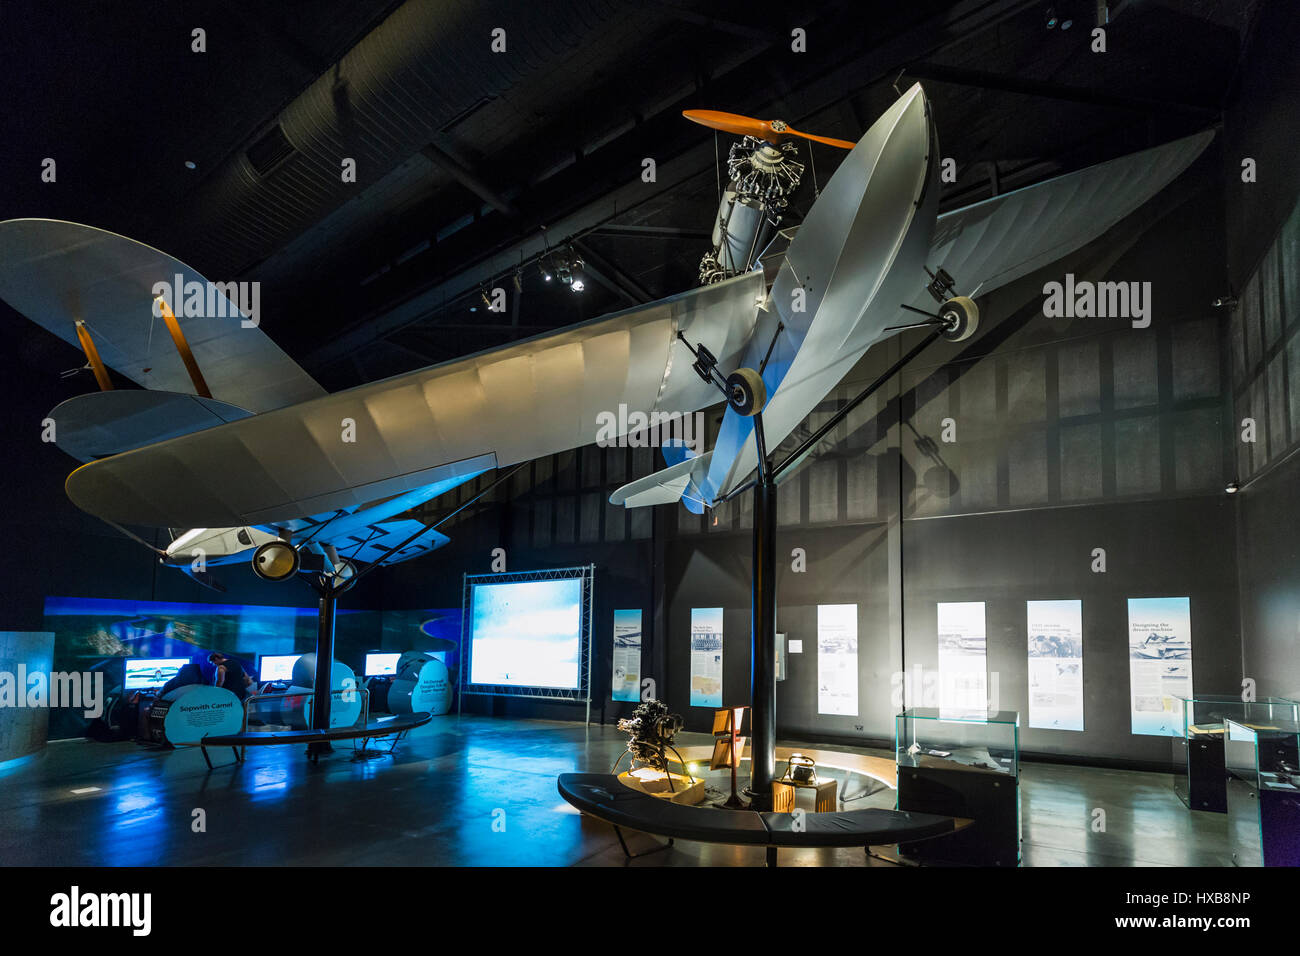 Replica aircraft including the Ibis and interactive exhibits inside the Hinkler Hall of Aviation.  Bundaberg, Queensland, Australia Stock Photo